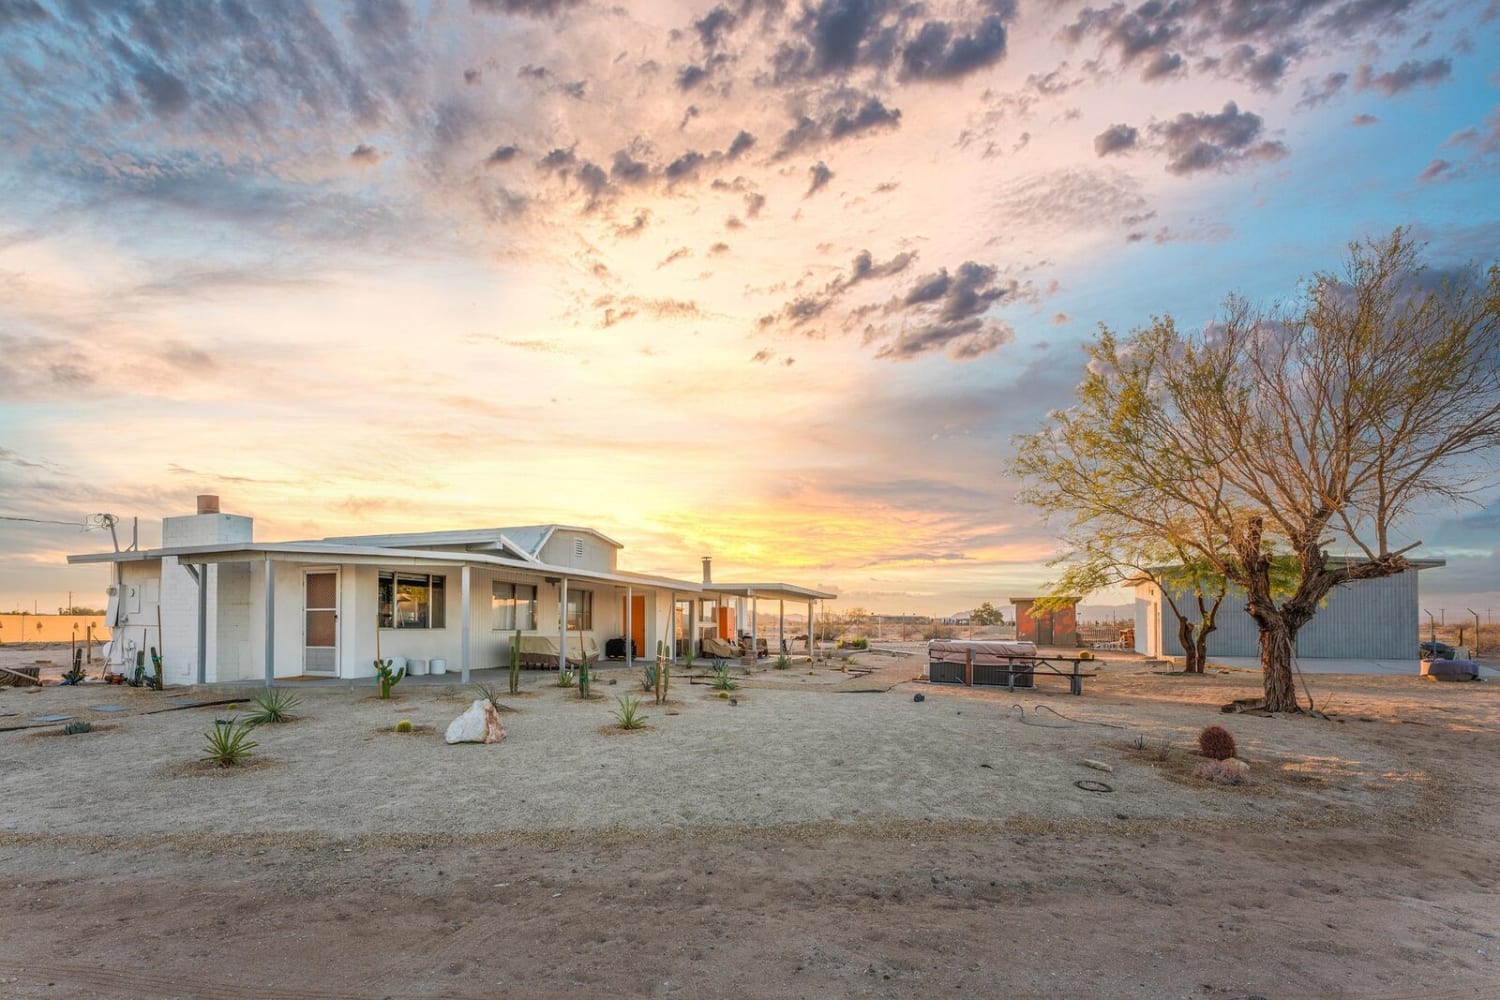 A 10-Acre Desert Escape With a Gussied-Up Bunkhouse Hits the Market for $750K